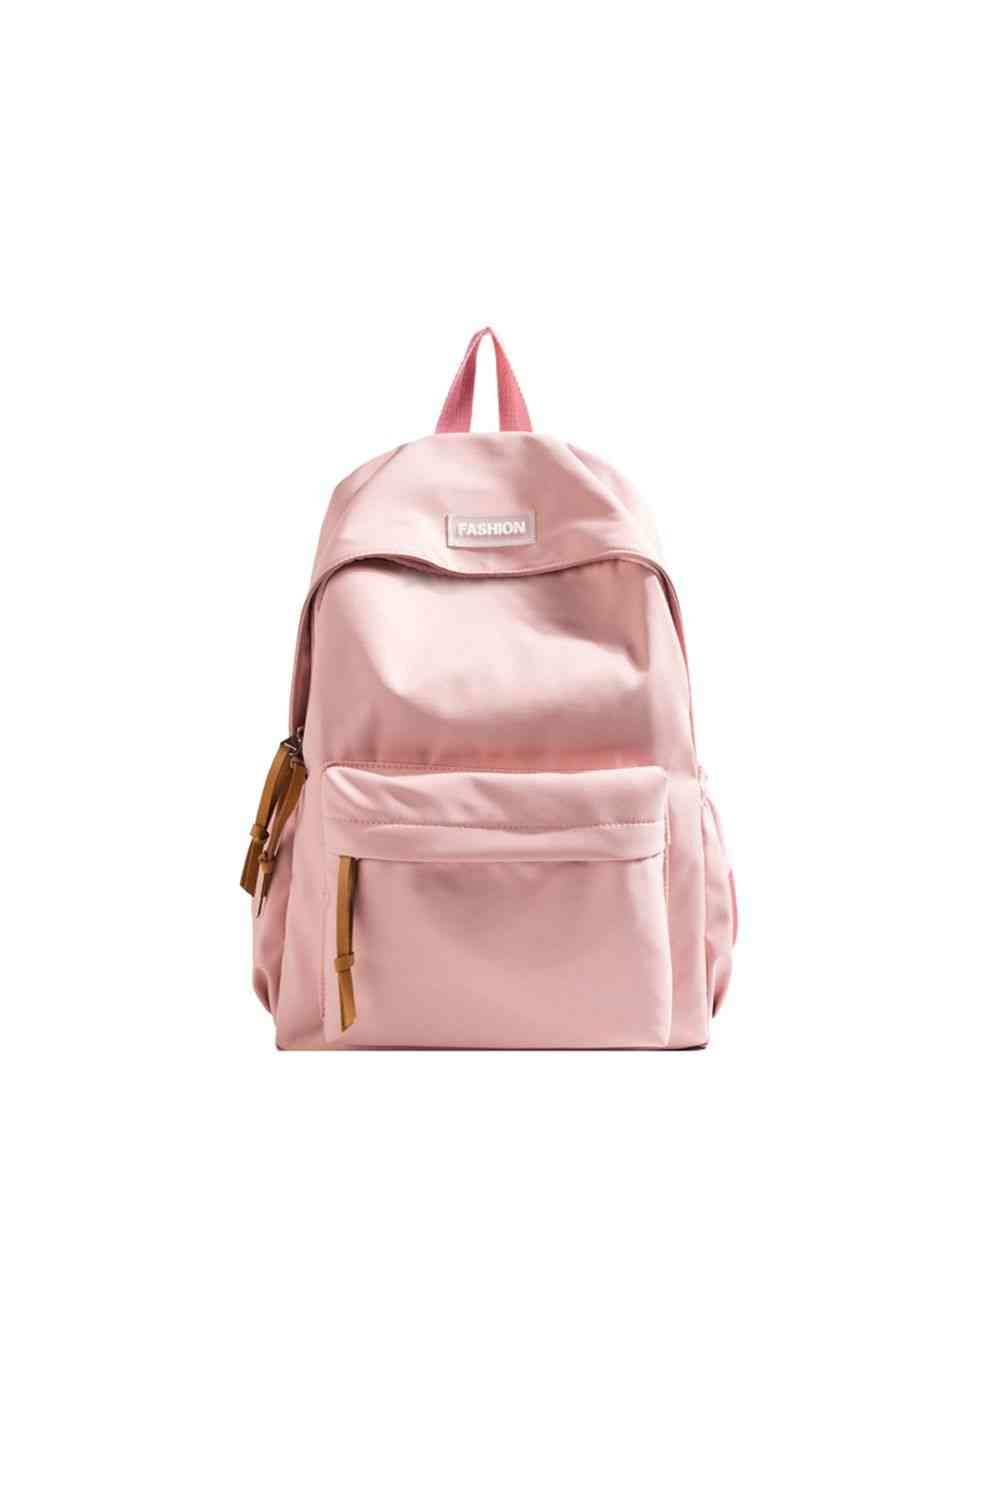 Adored FASHION Polyester Backpack Peach One Size